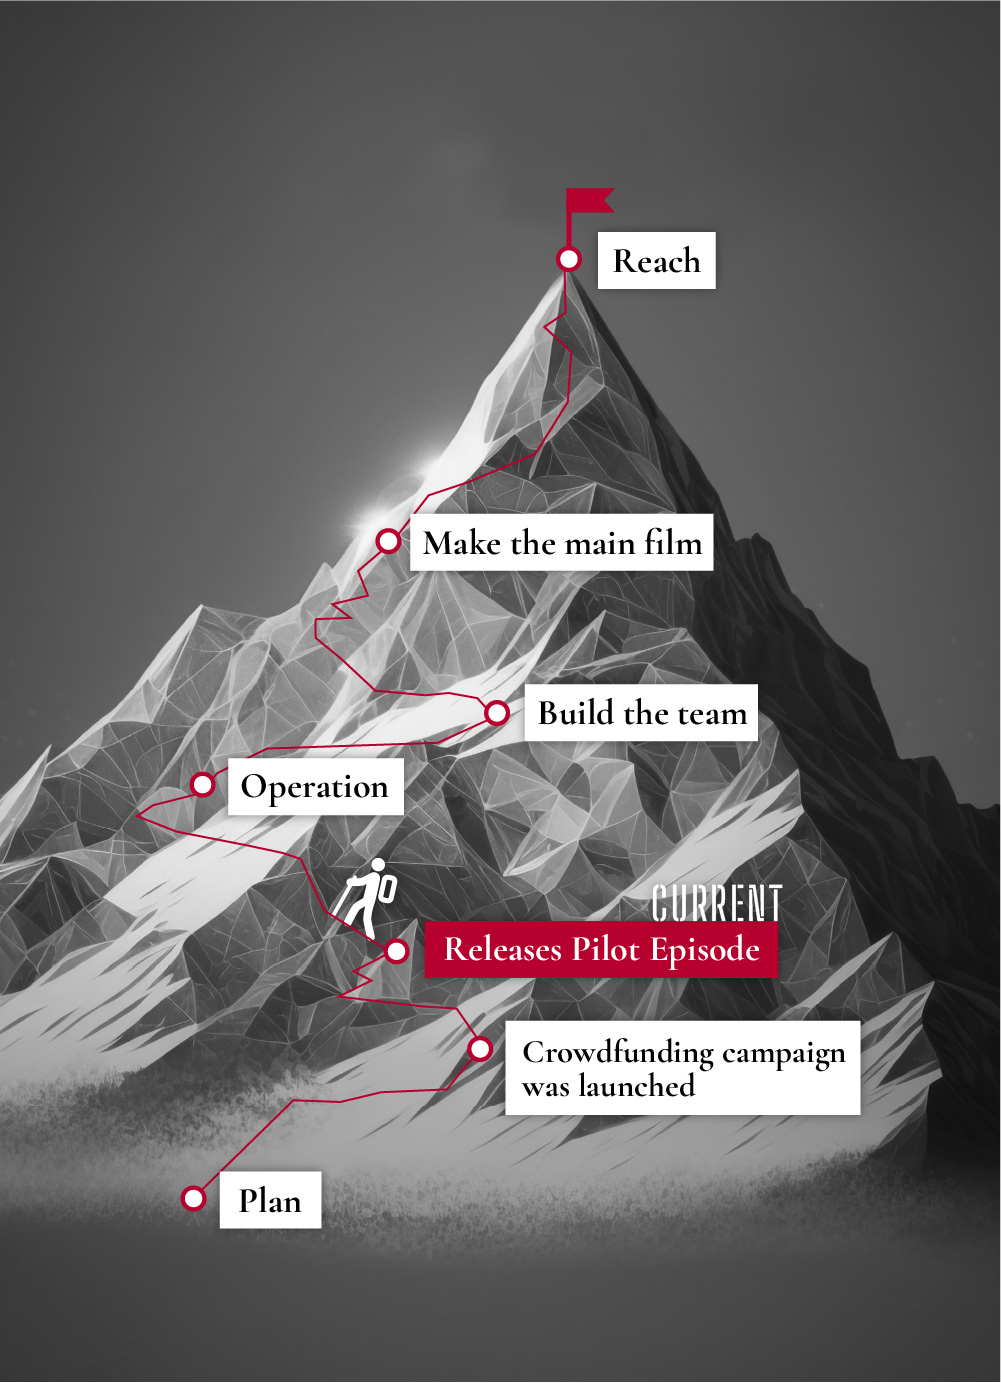 Roadmap to completion of the movie